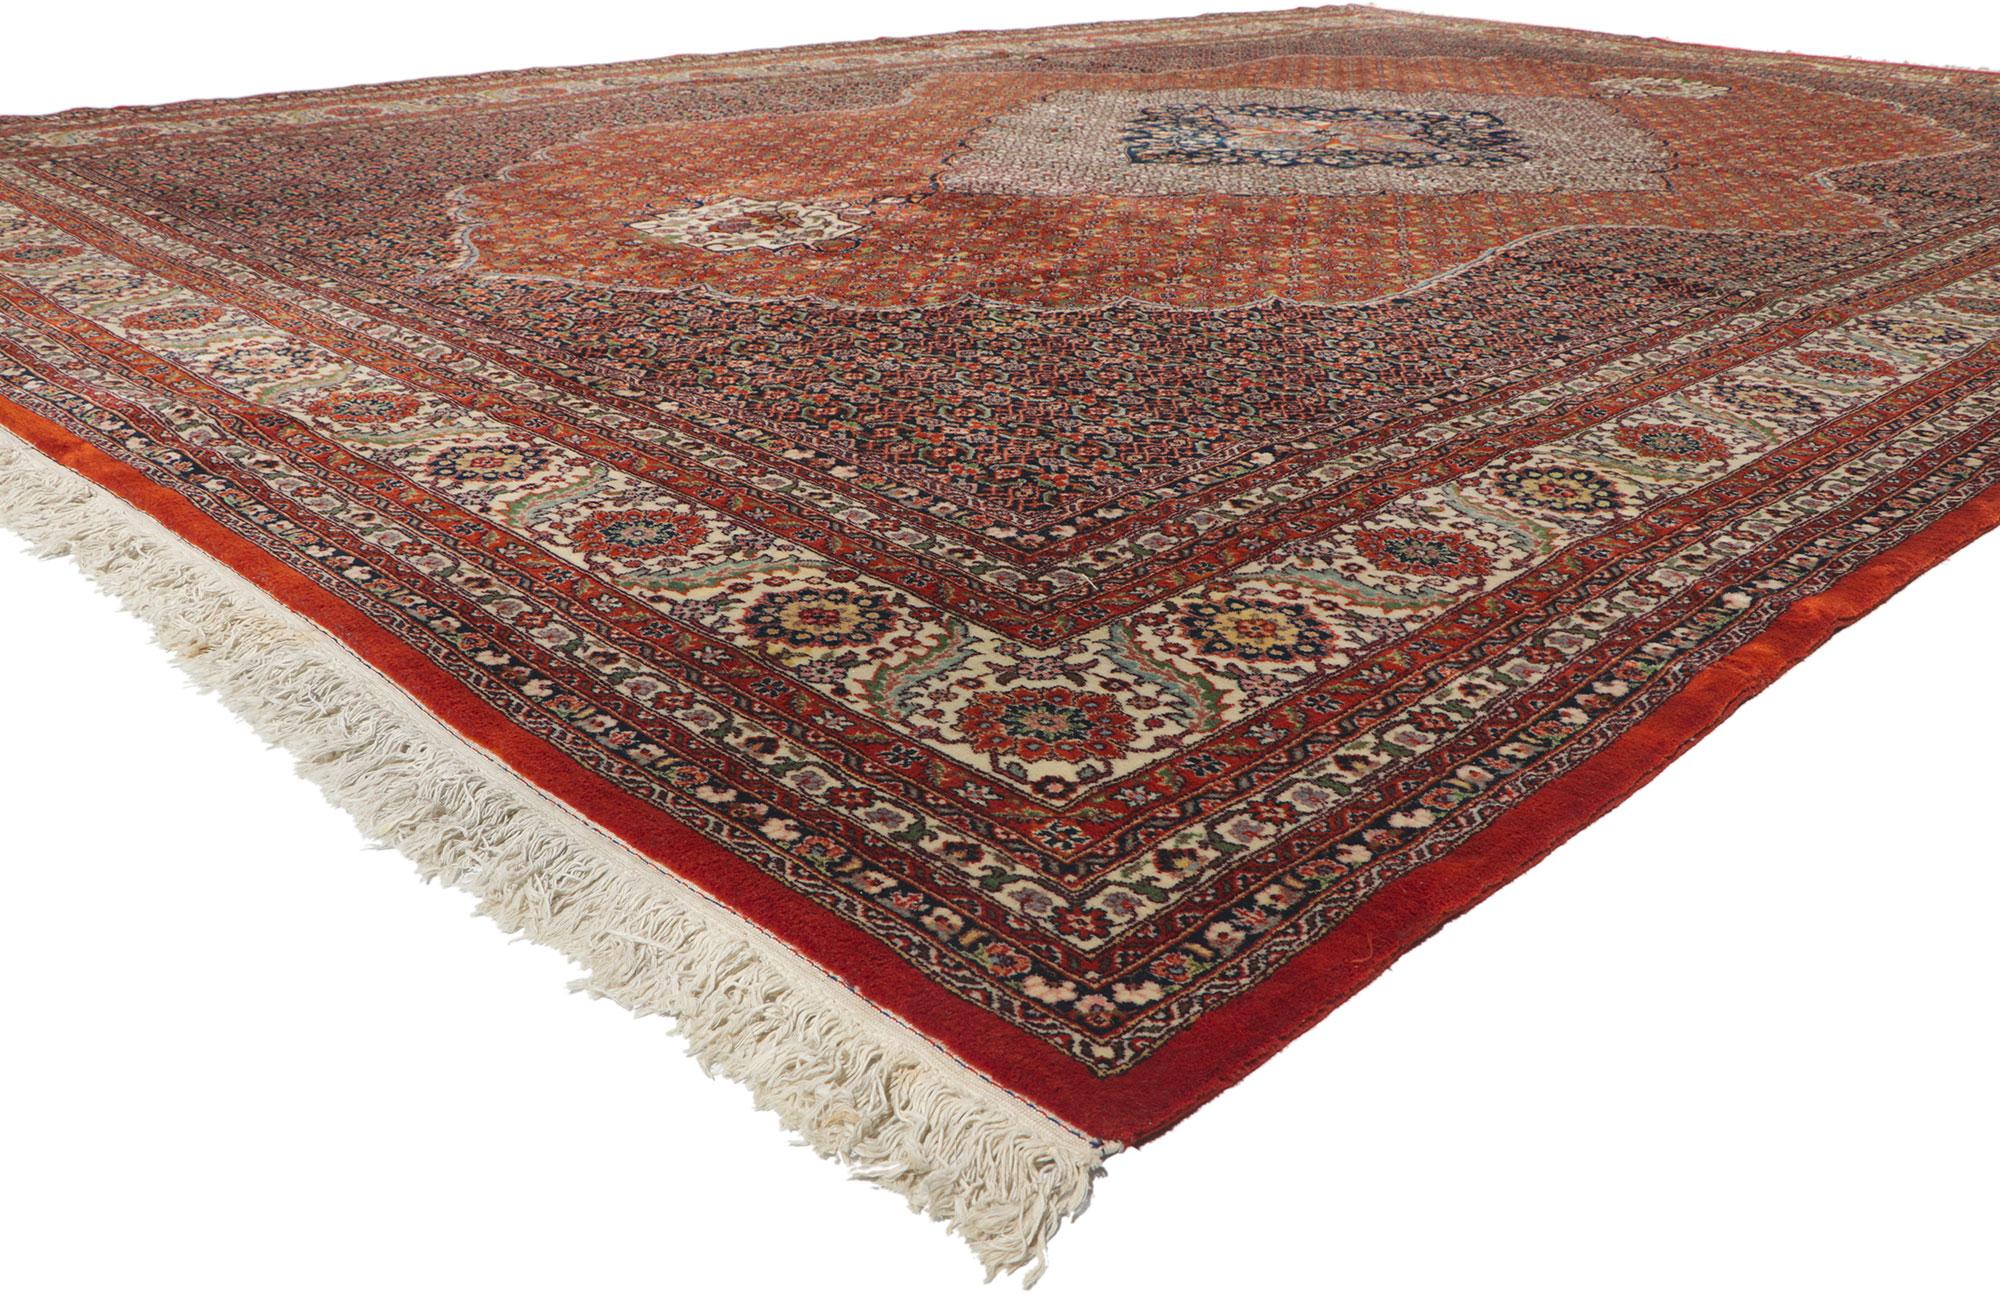 78414 Vintage Persian Tabriz rug, 11'11 x 17'08.
With ornate details and well-balanced symmetry, this hand-knotted wool vintage Persian Tabriz rug is poised to impress. Taking center stage is a concentric lobed medallion anchored with palmette